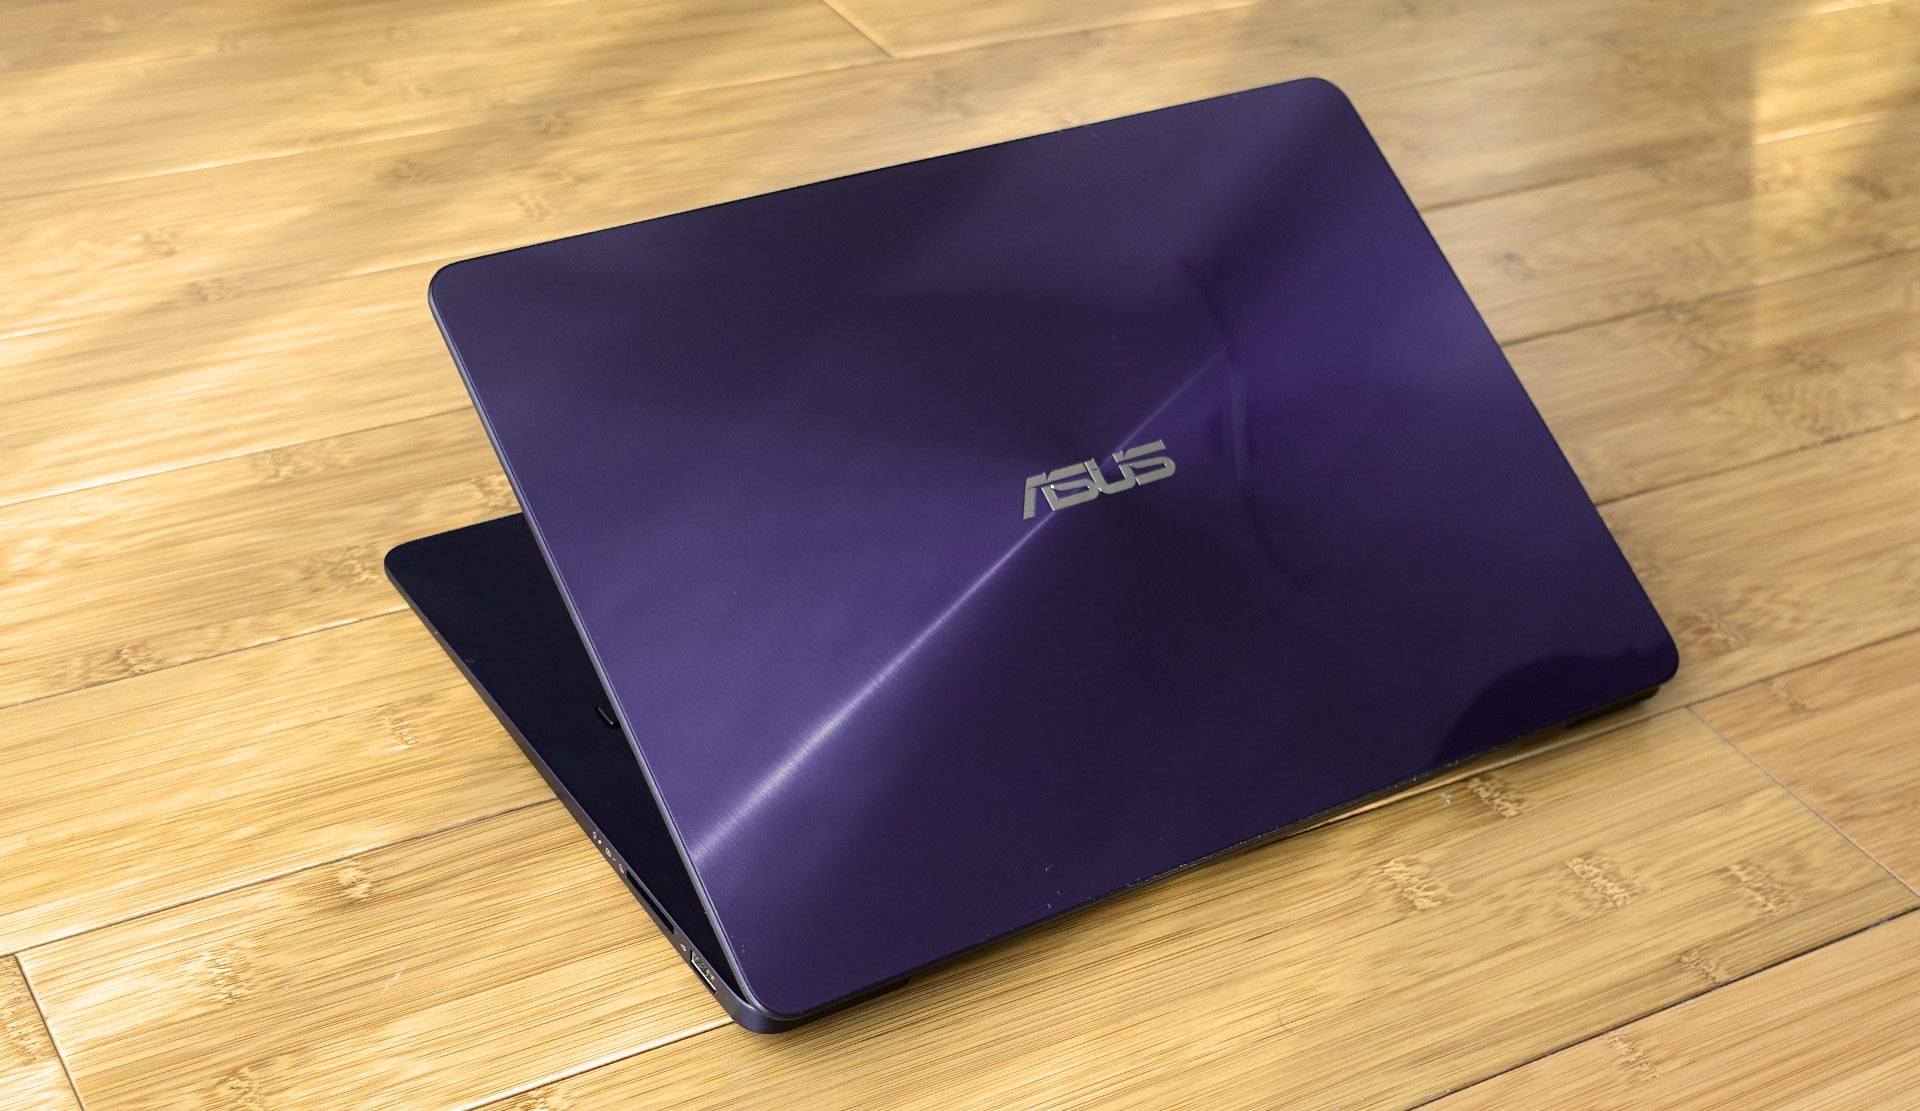 Expect the Zenbook UX430 to start at $899 in the US and 999 EUR in Europe